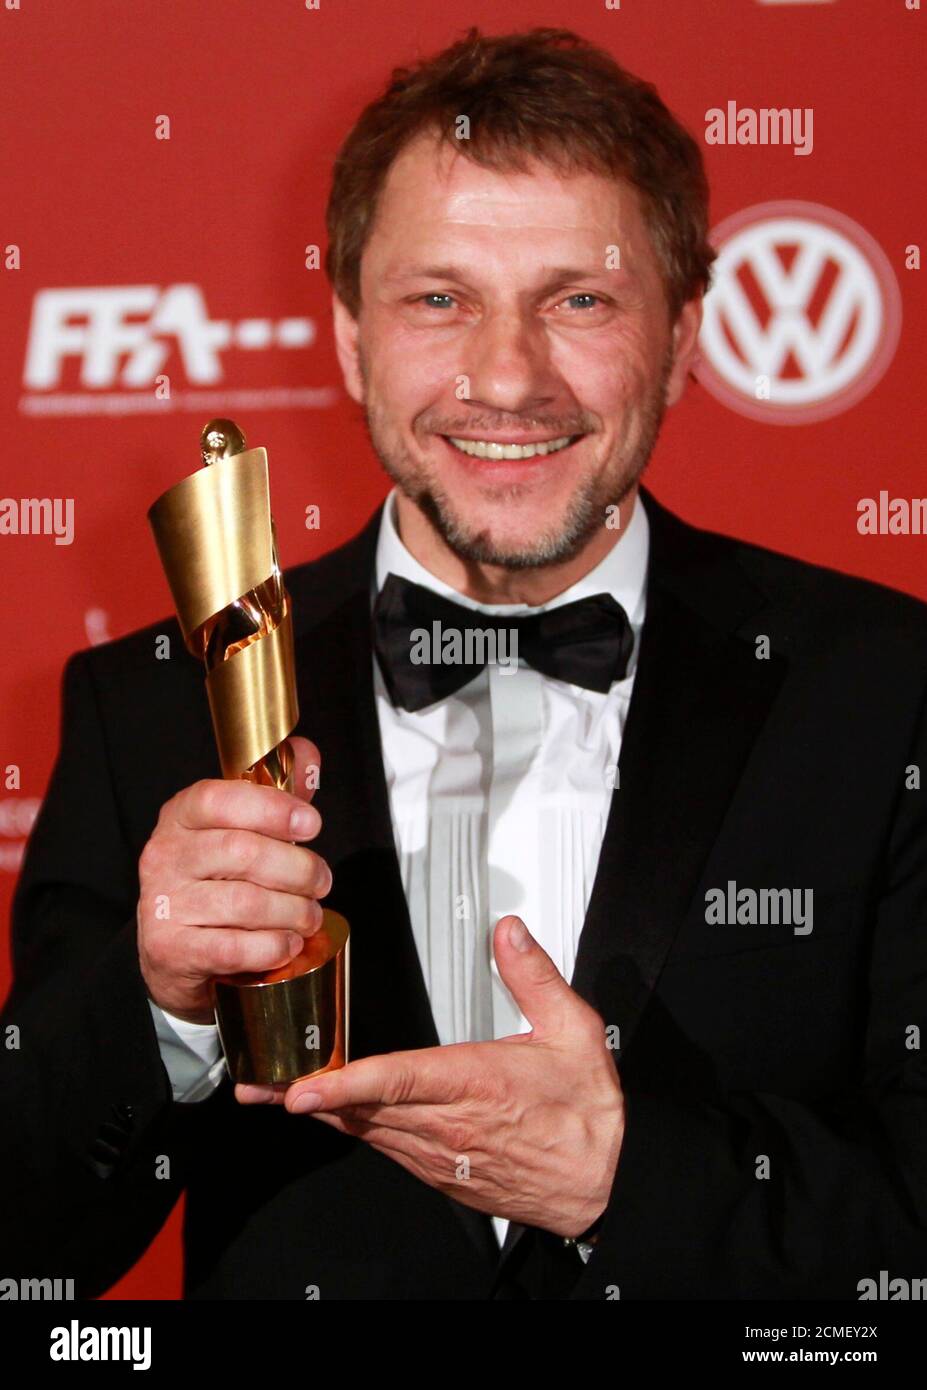 German actor Richy Mueller poses with the award for the best supporting male role in the film 'Poll' during the German Film Prize (Lola) ceremony in Berlin, April 8, 2011.        REUTERS/Thomas Peter (GERMANY  - Tags: ENTERTAINMENT SOCIETY) Stock Photo